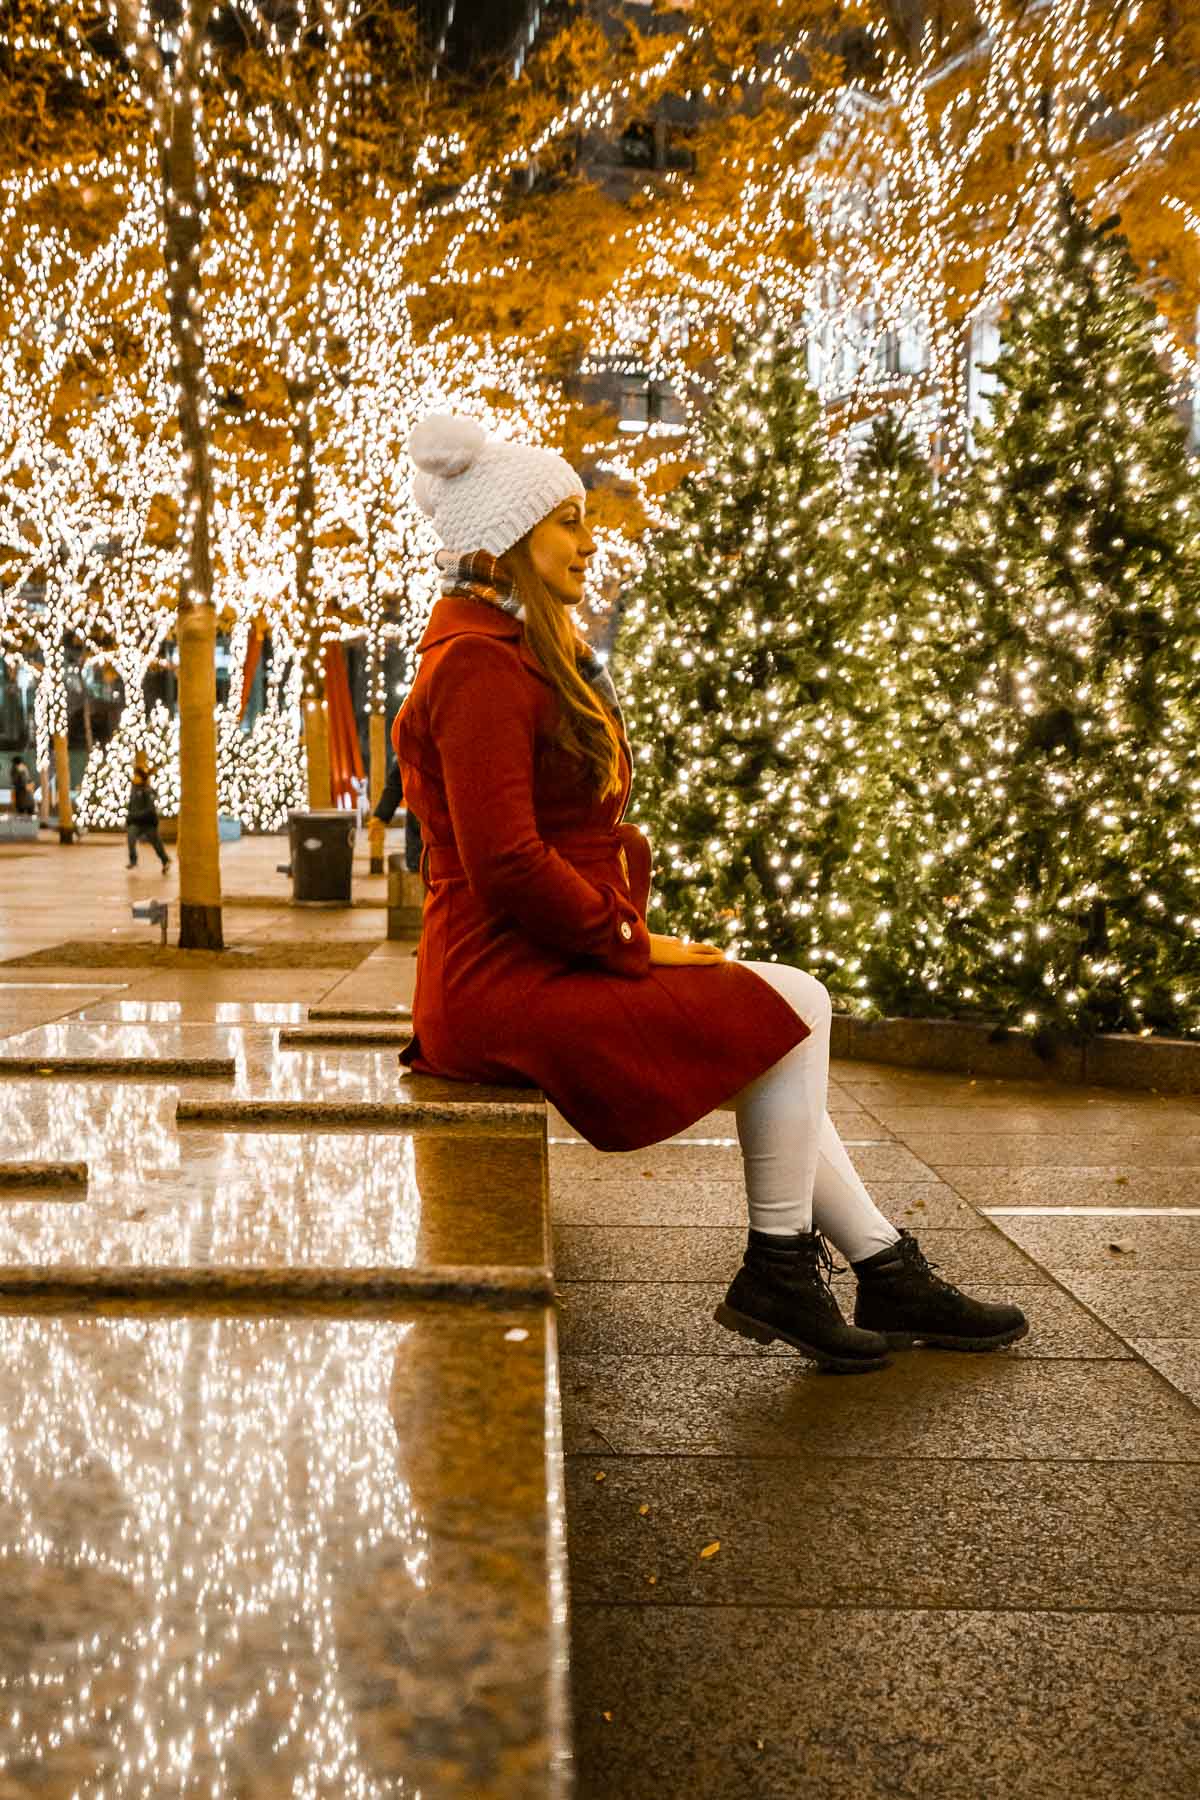 Girl sitting on a bench in Zuccotti Park with Christmas lights in New York